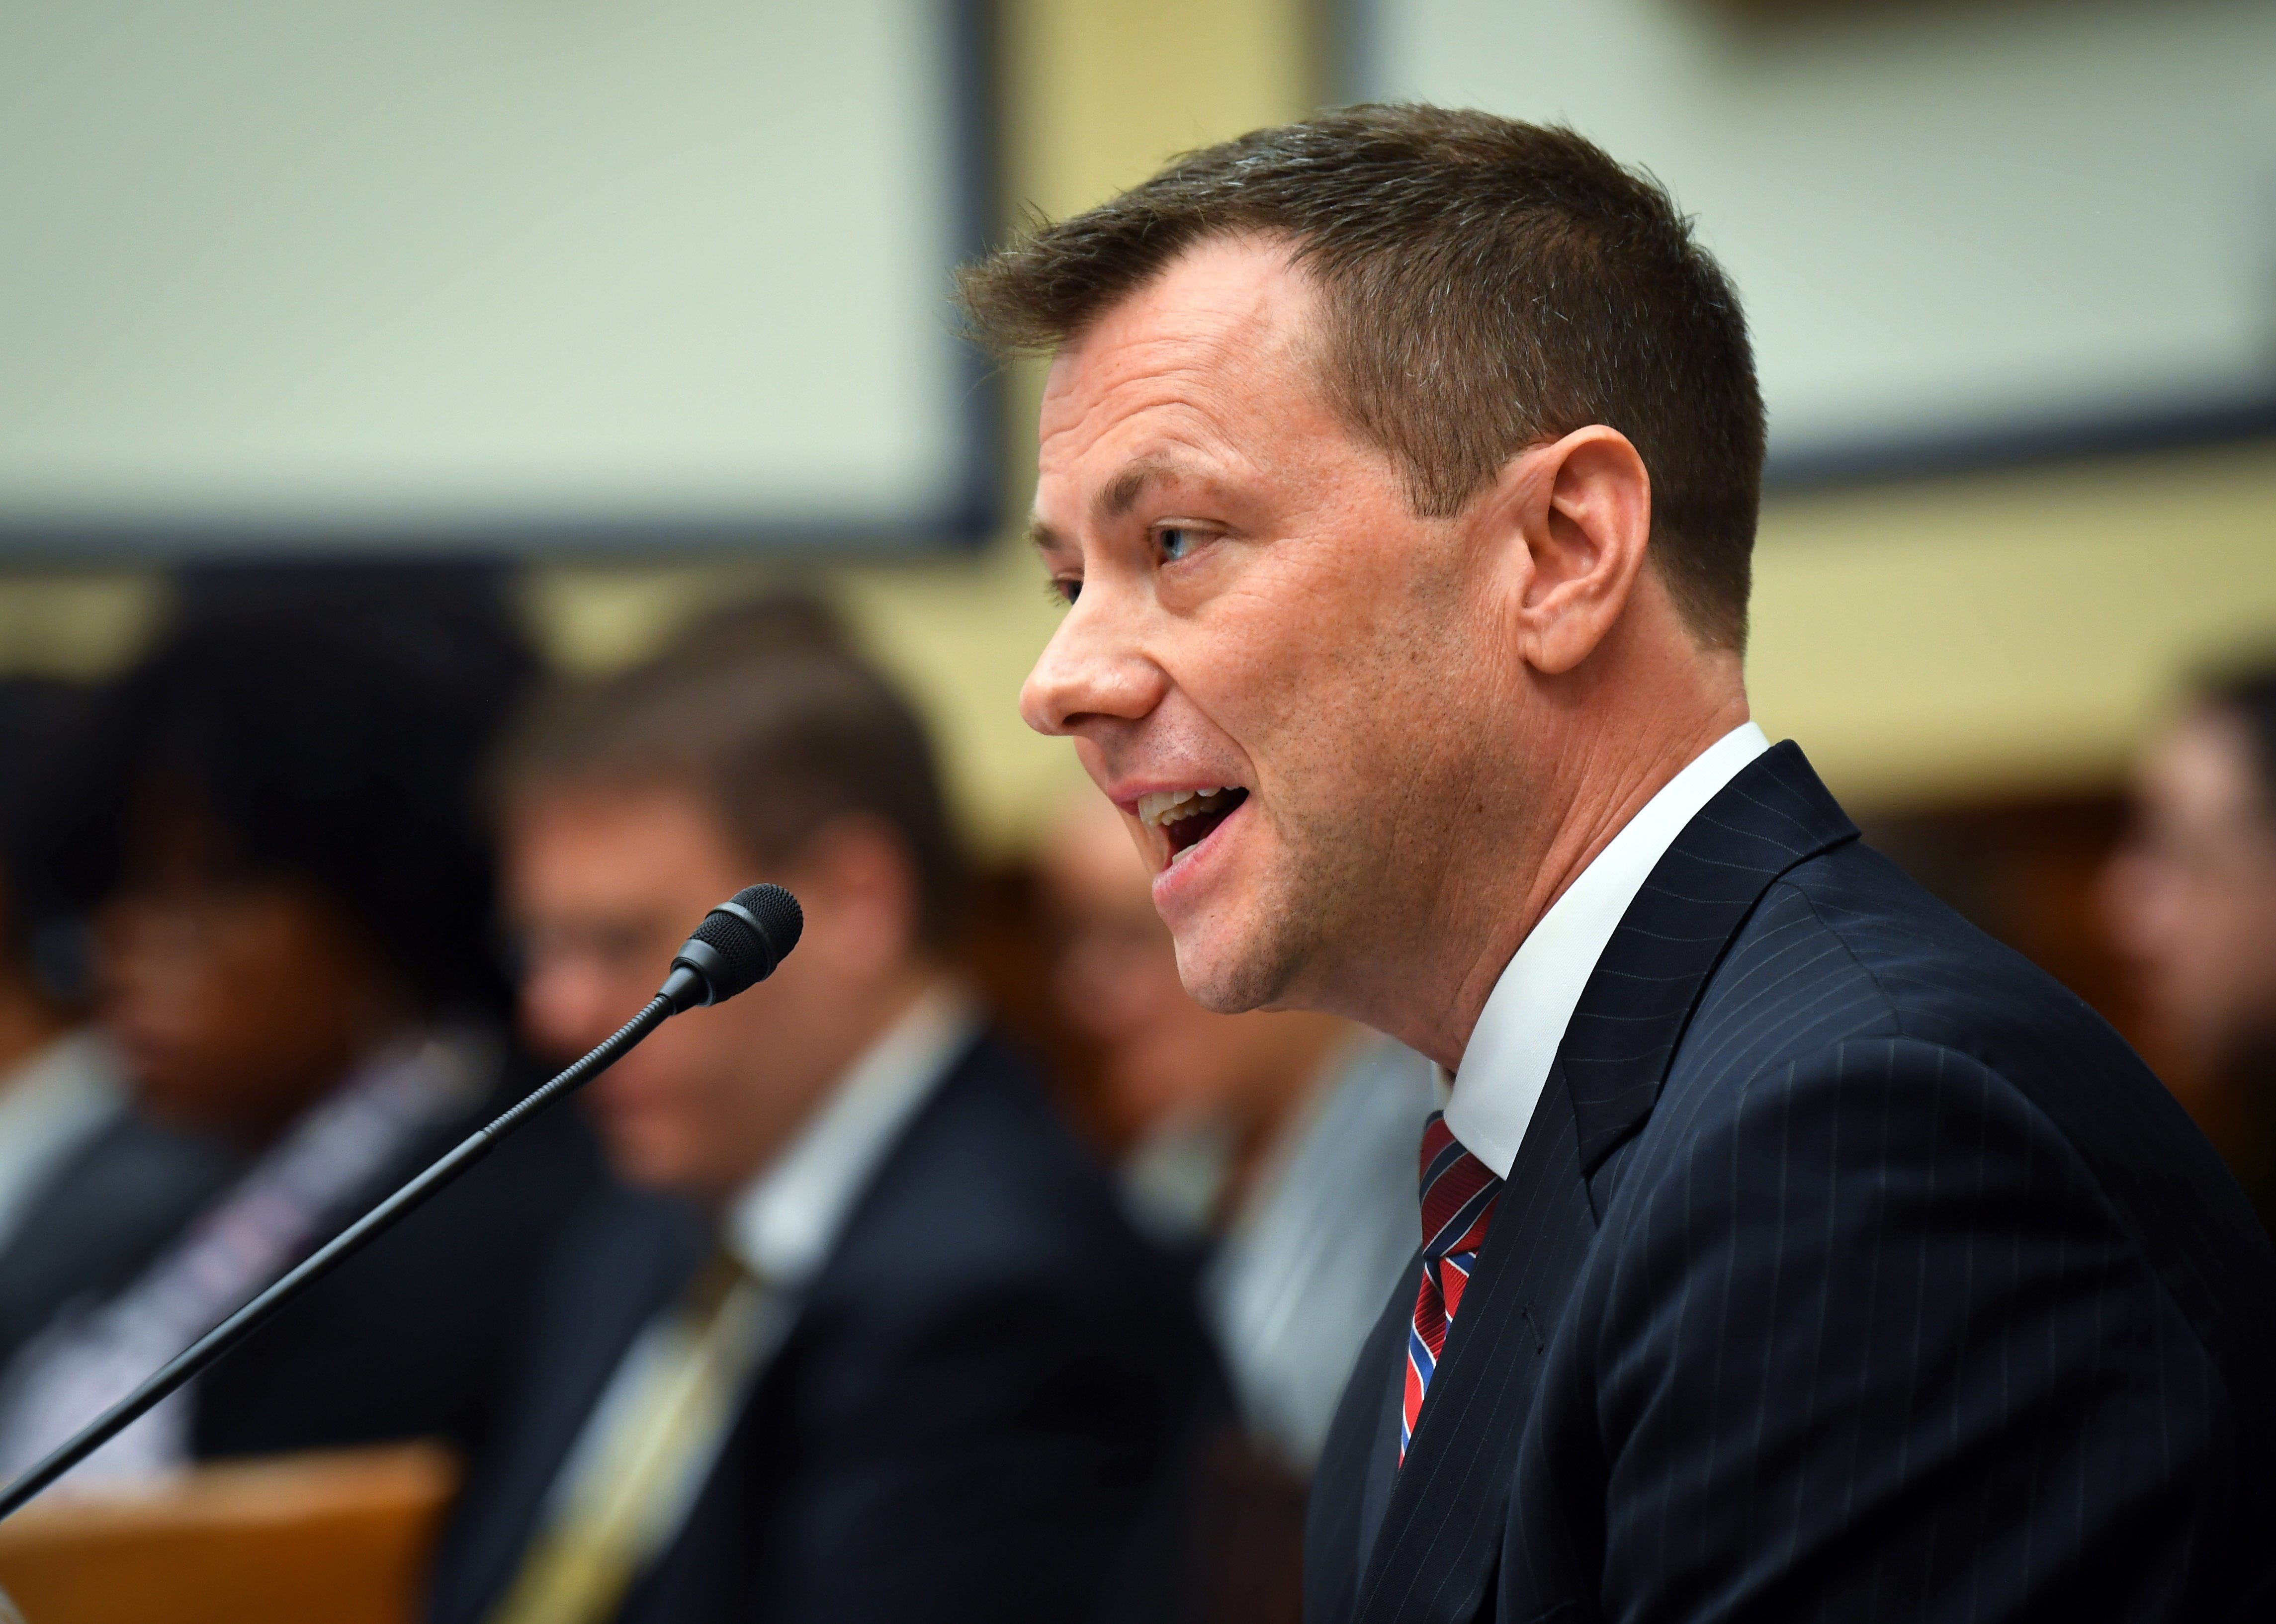 compromised book by peter strzok